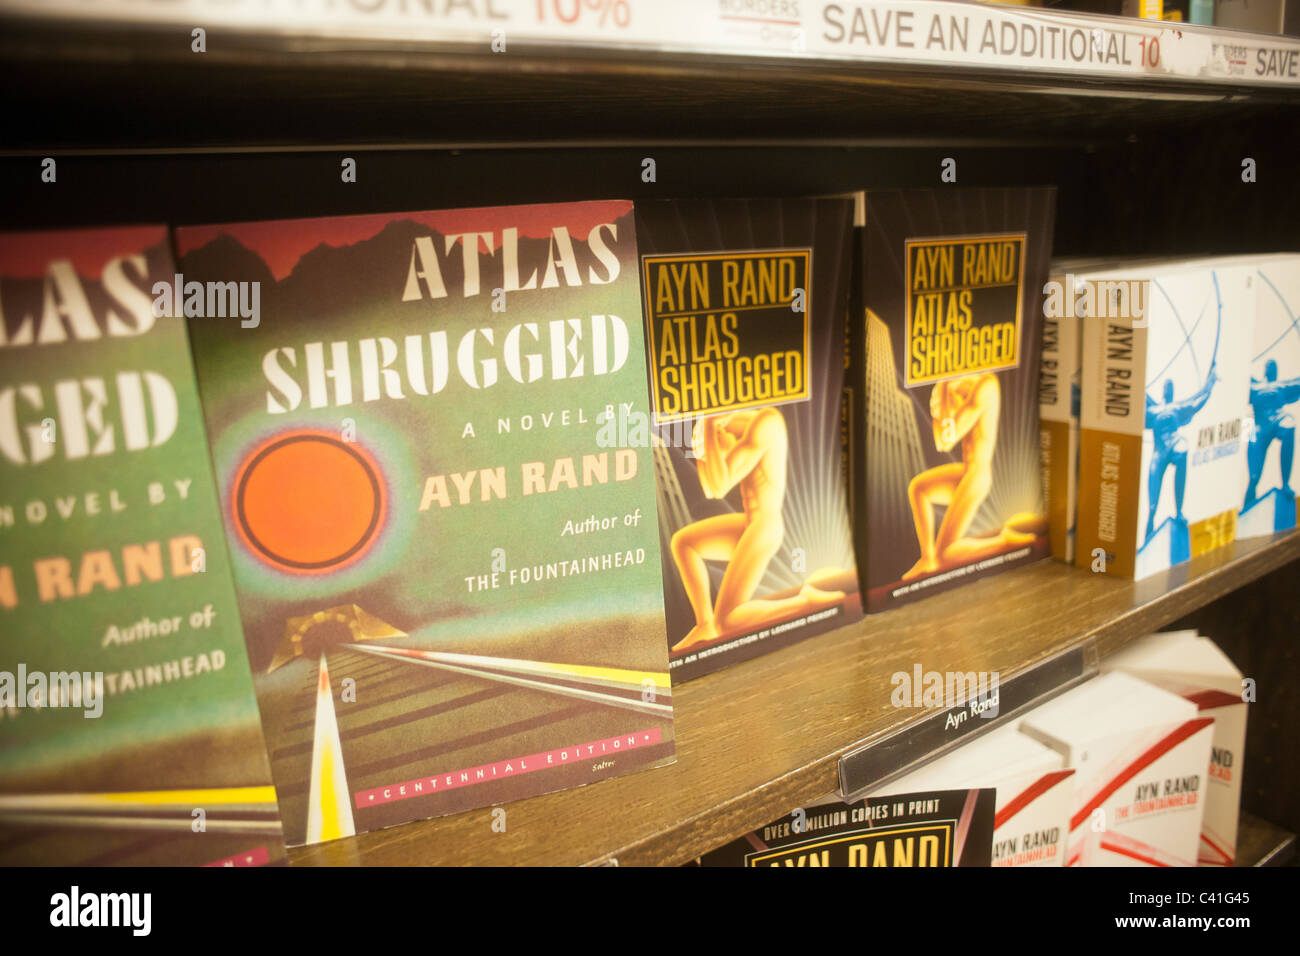 The 1957 novel Atlas Shrugged by Ayn Rand is seen on the shelves of a Borders bookstore in New York Stock Photo